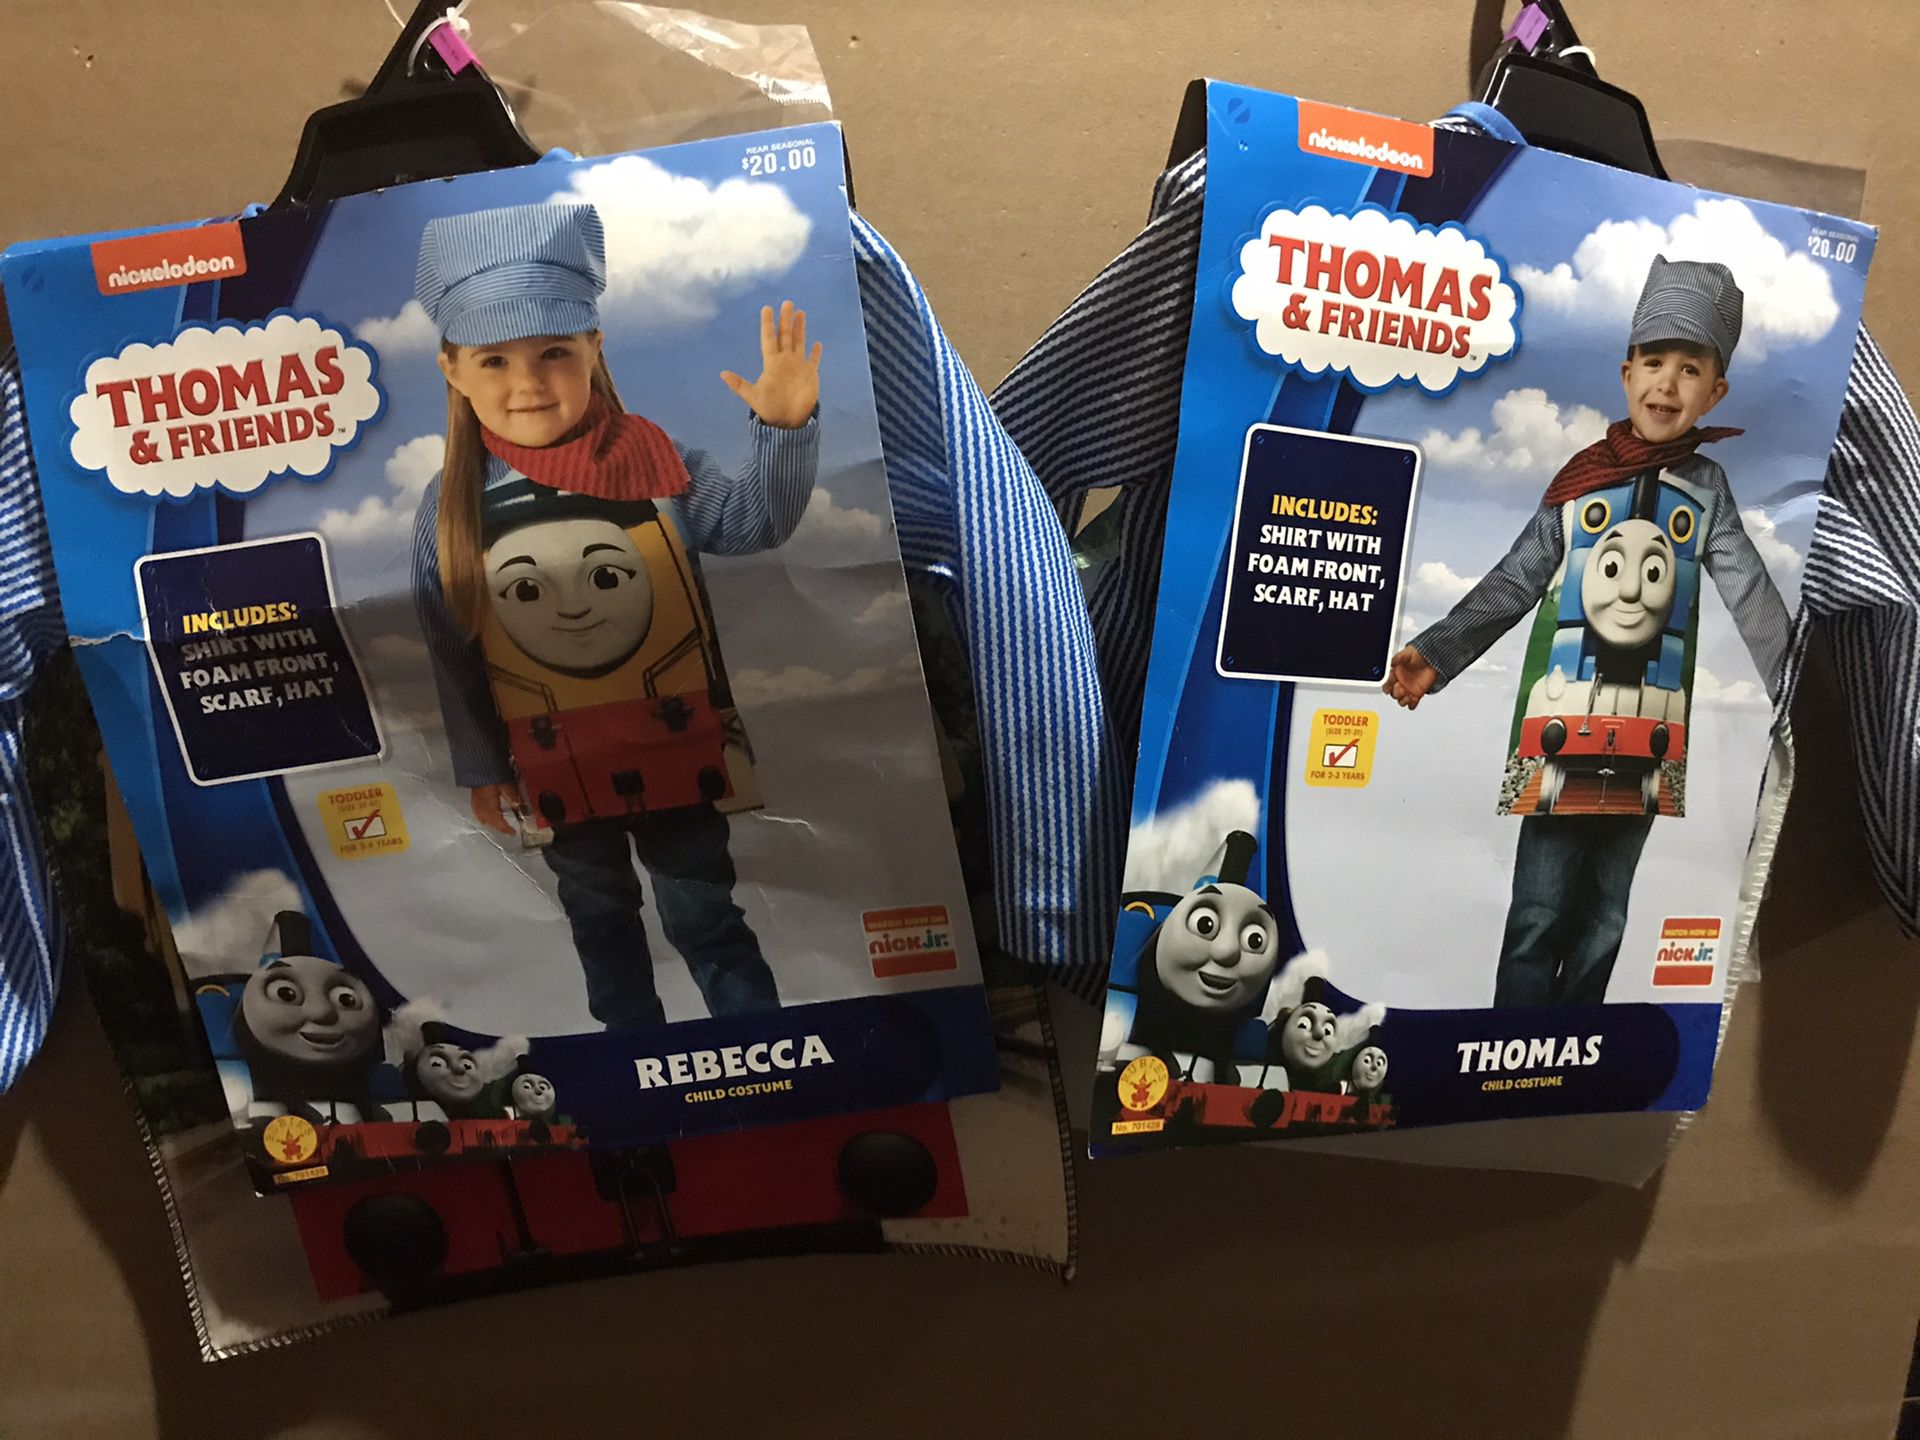 Thomas the train Halloween costume 10 each or 18 for both